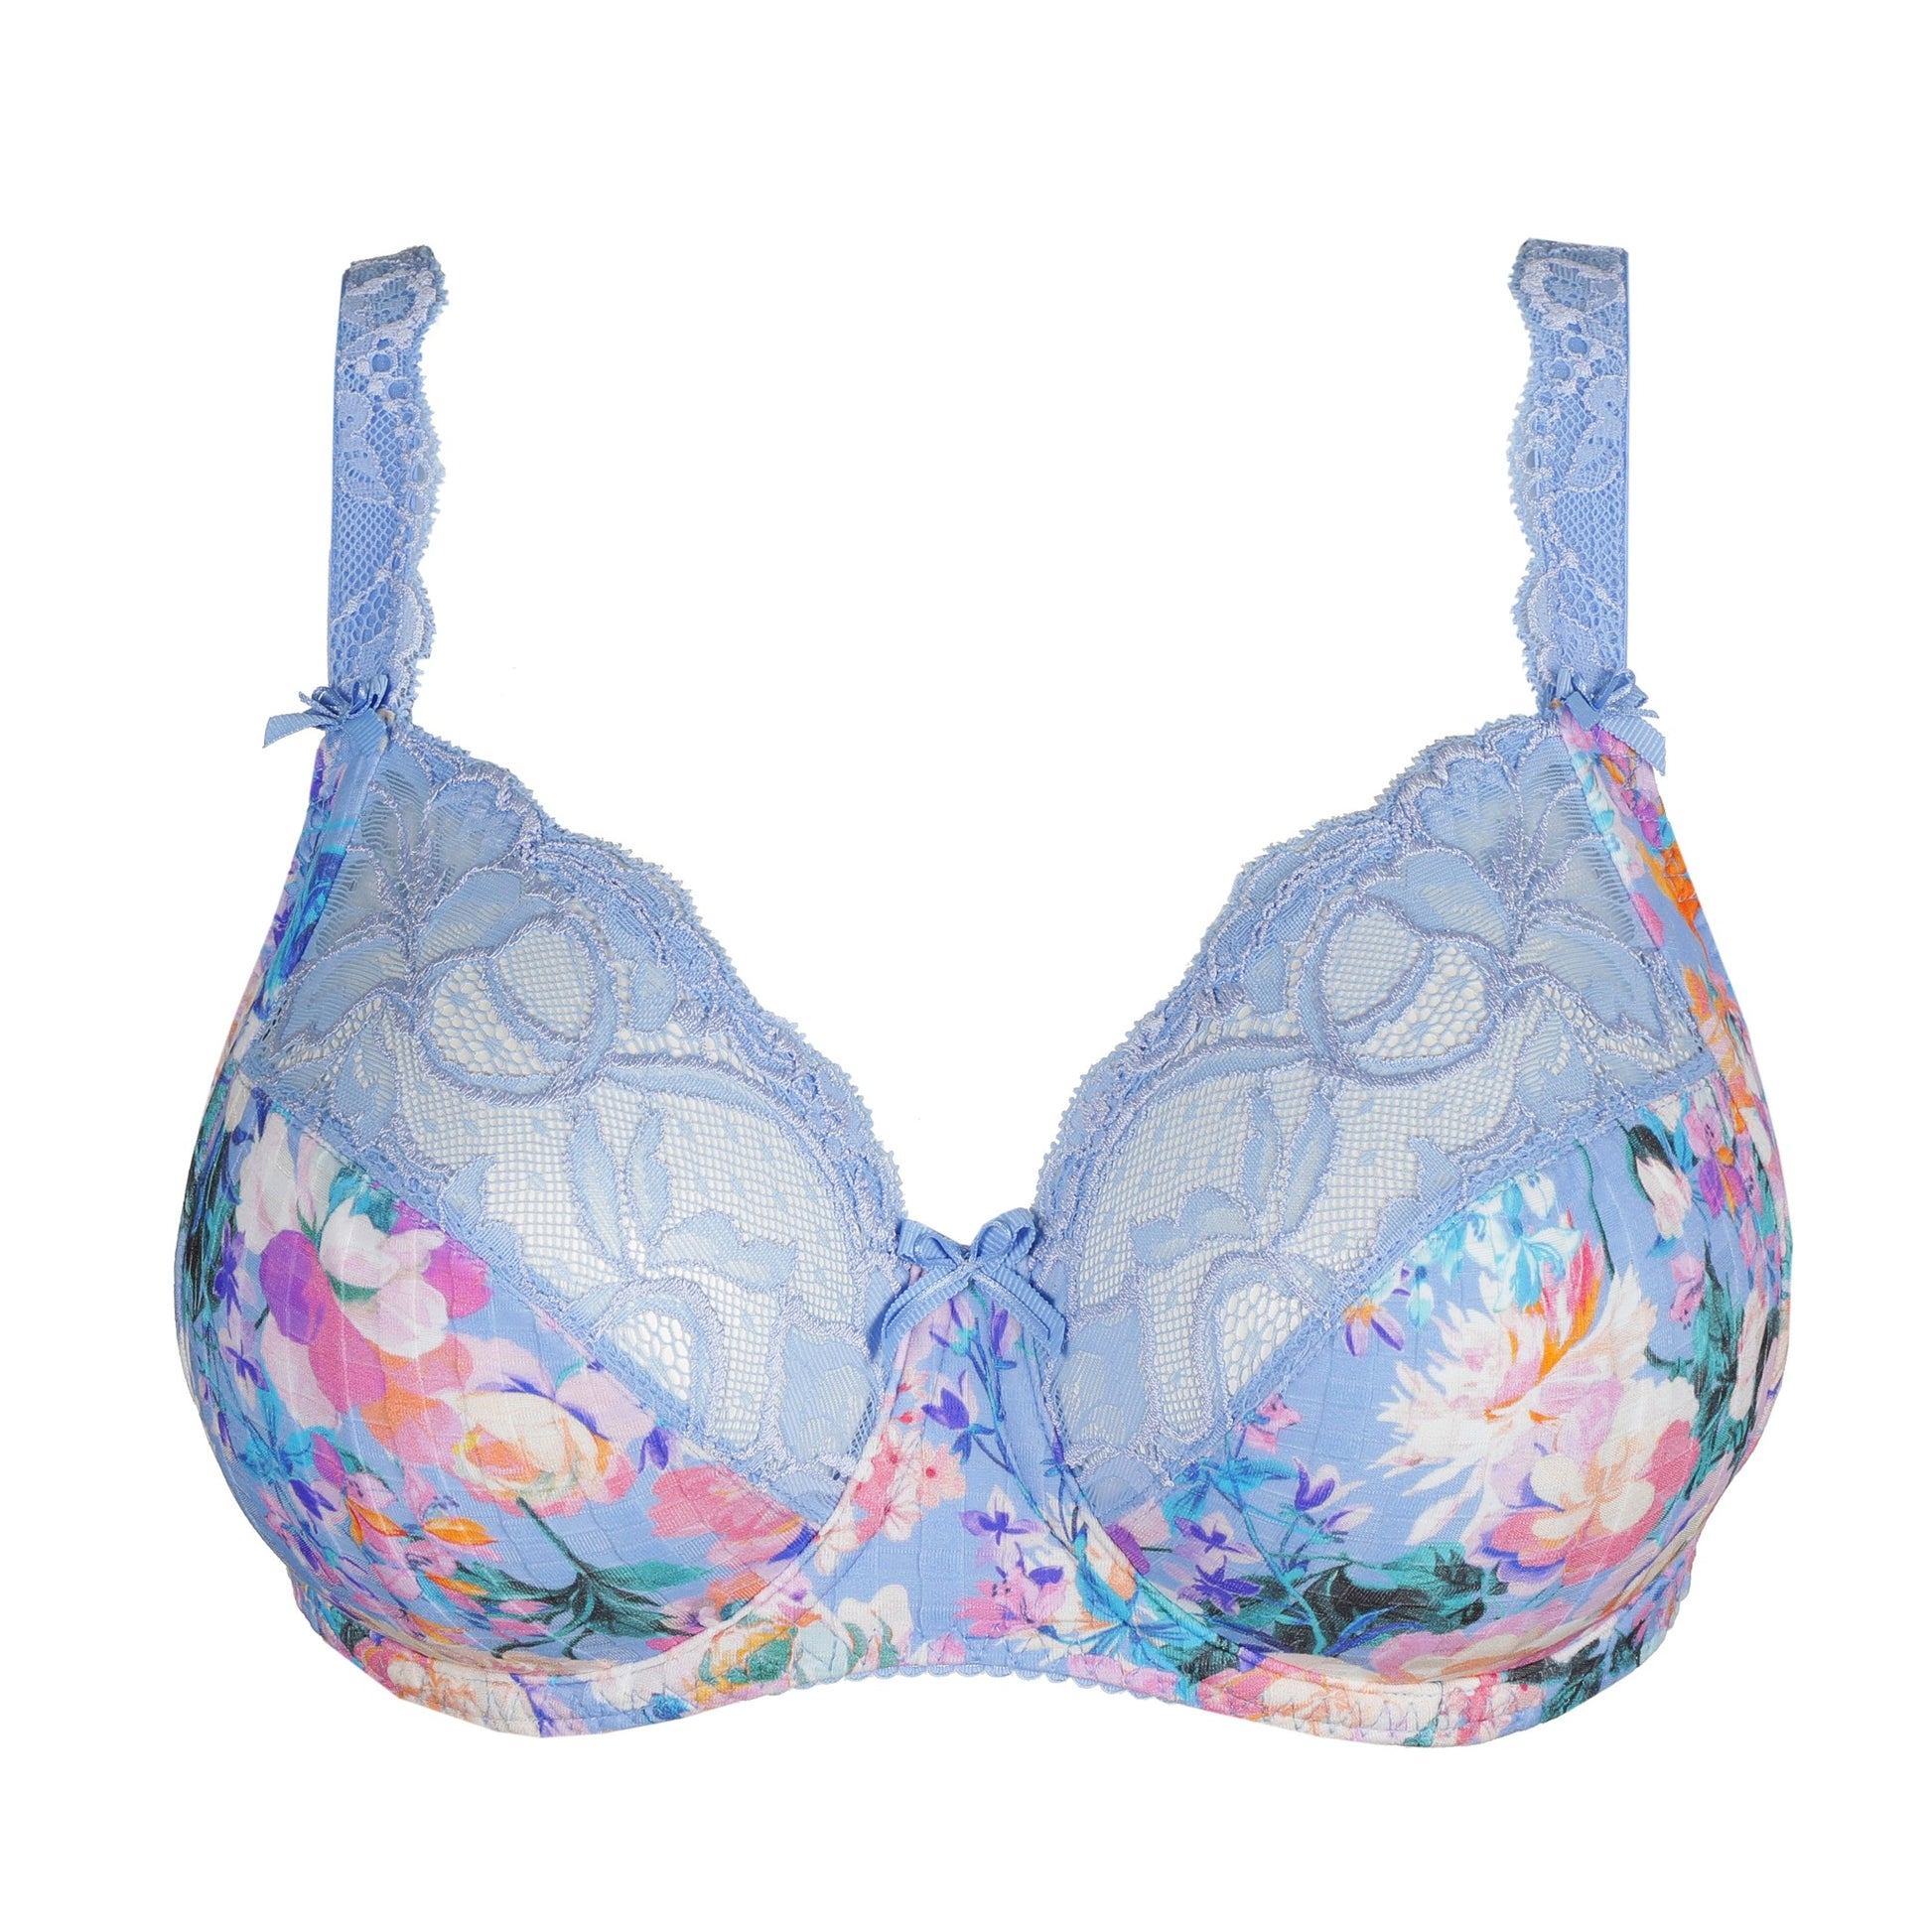 Madison Full Cup Bra in Periwinkle Floral by PrimaDonna.